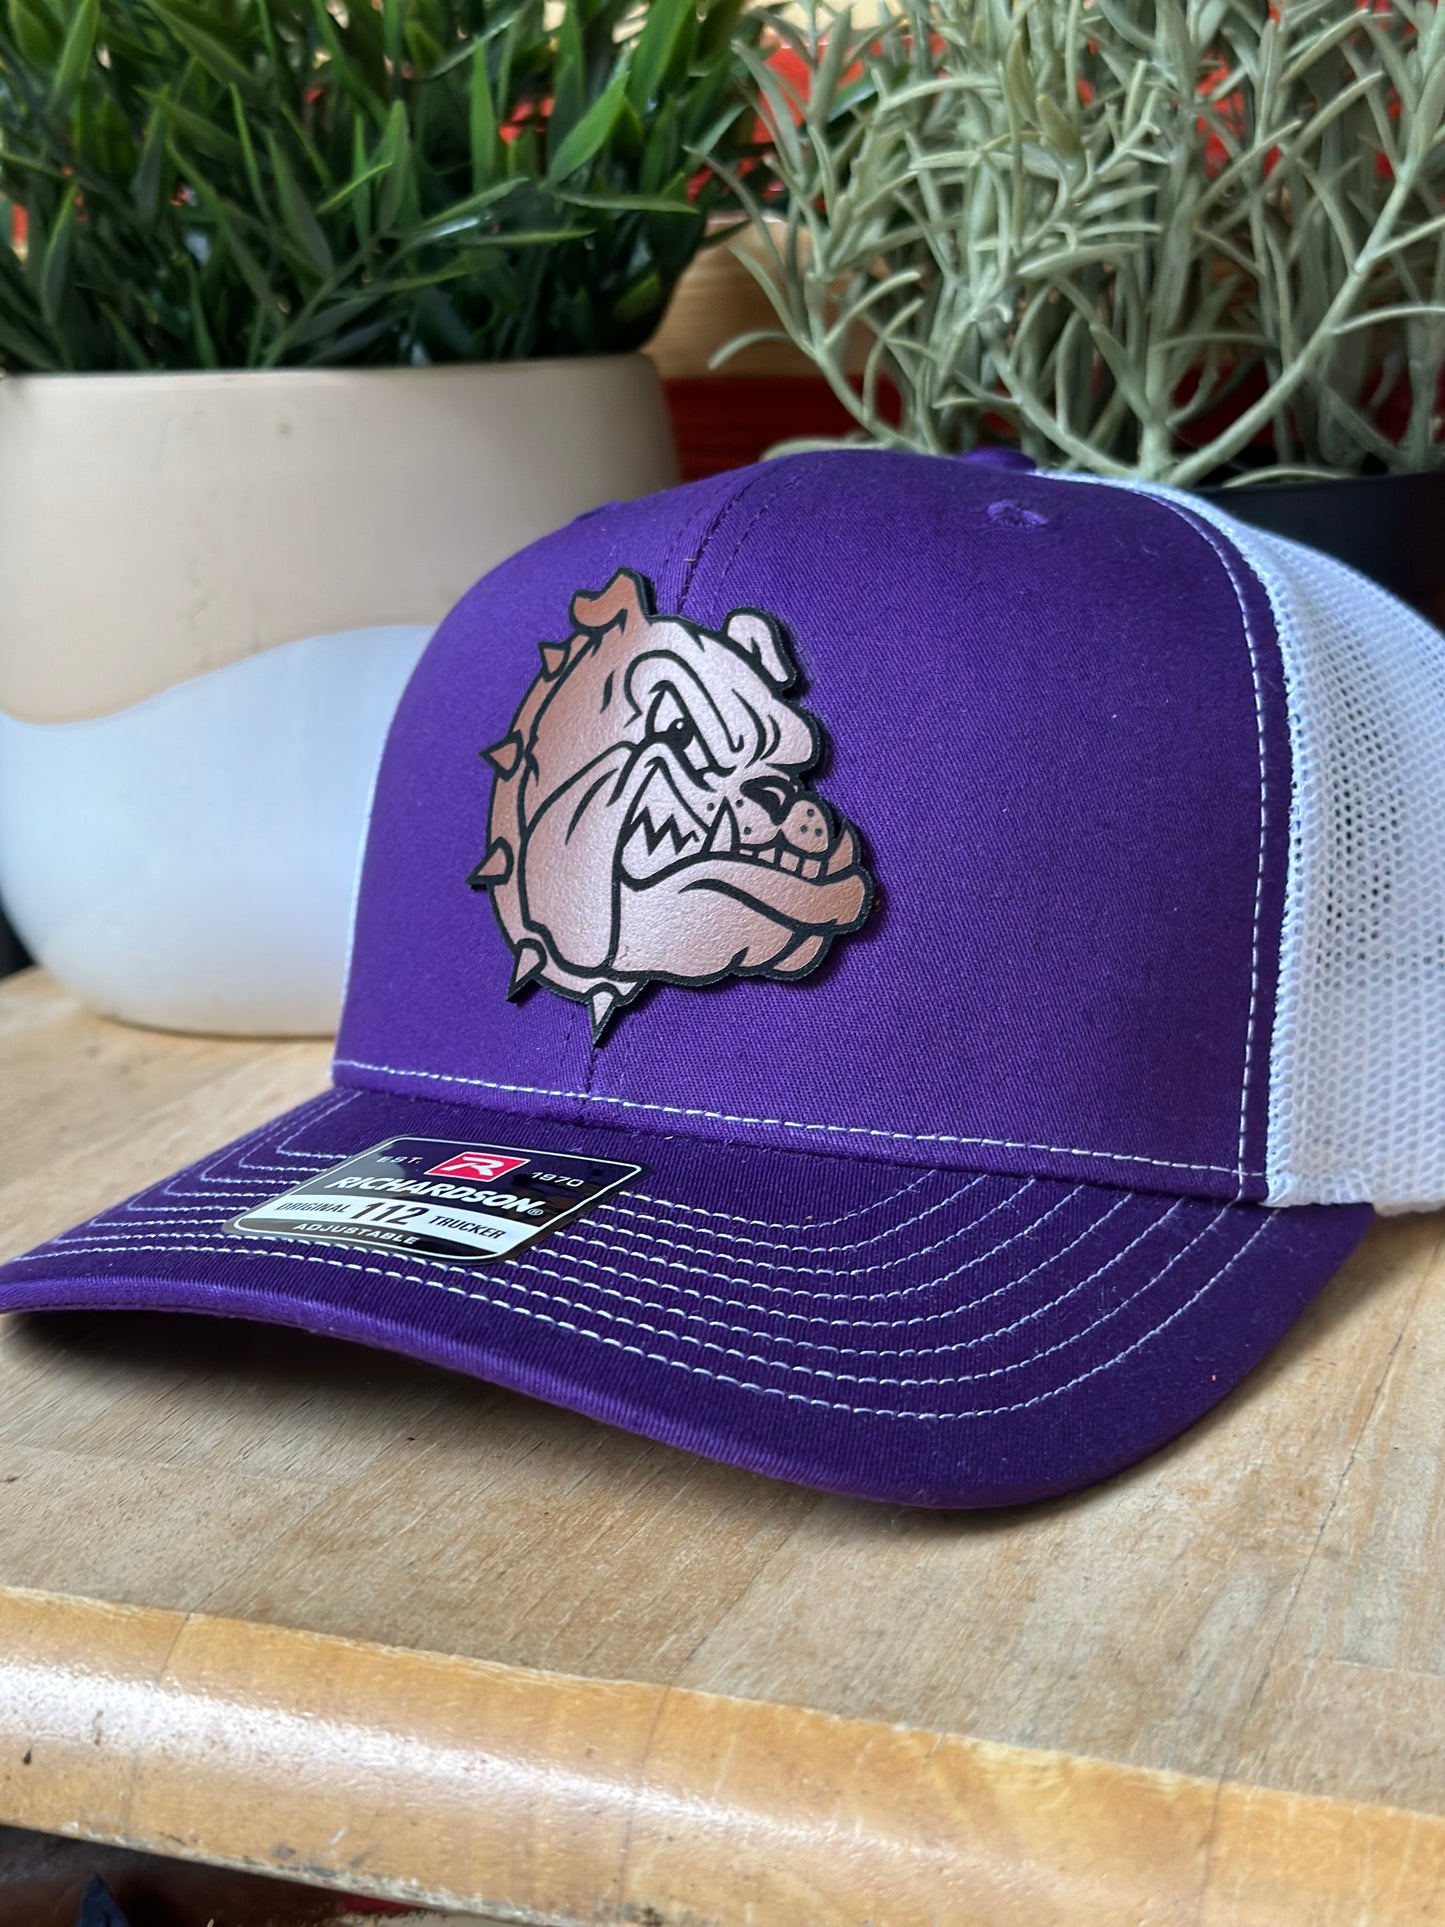 East Knox Bulldog Leatherette hat patch